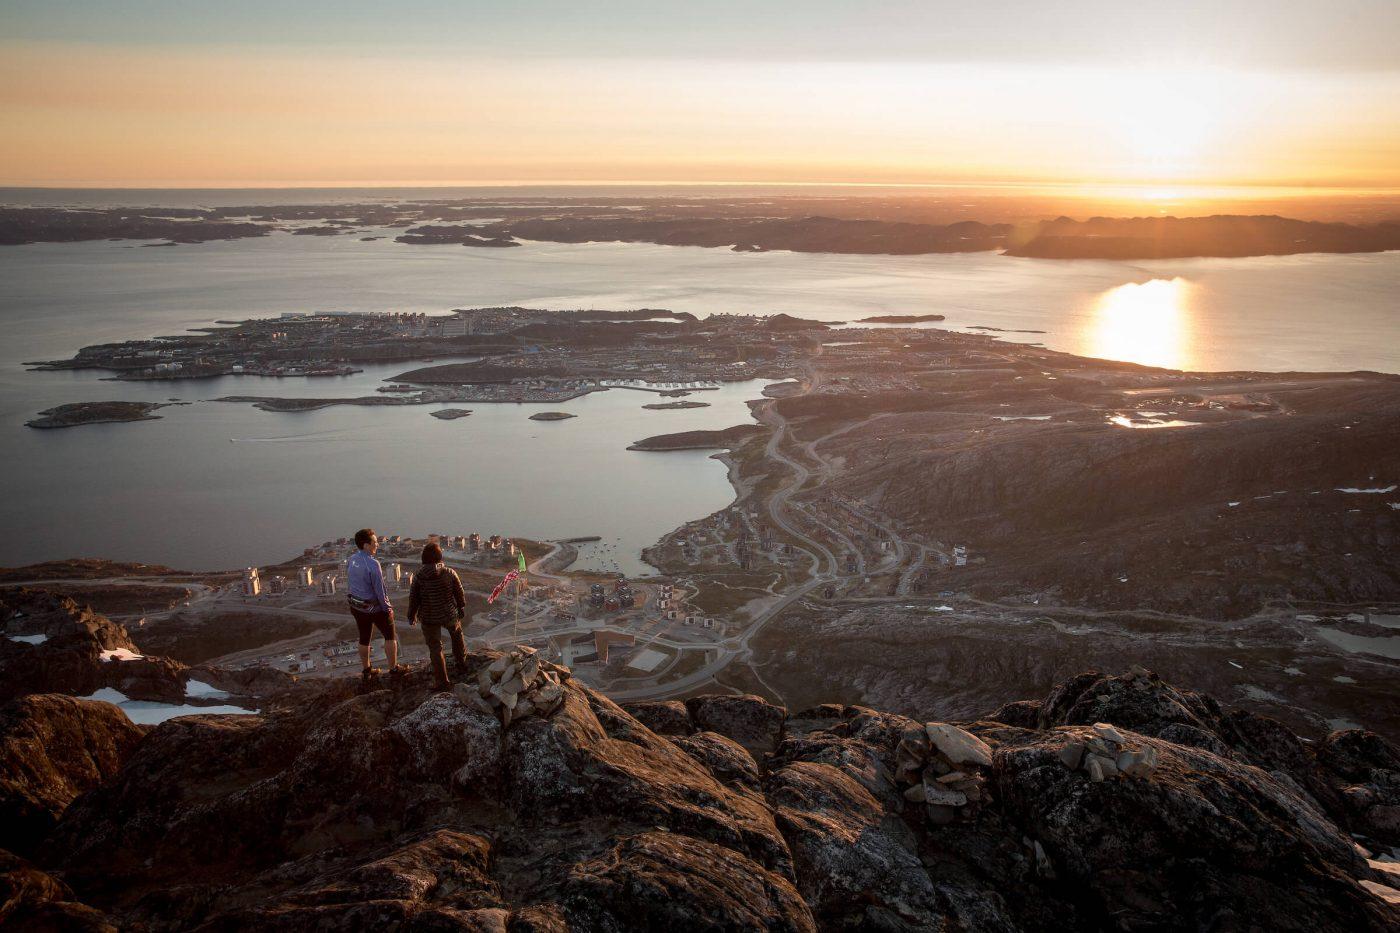 Two hikers overlooking Nuuk in the midnight sun from the peak of Ukkusissaq - Store Malene in Greenland. By Mads Pihl